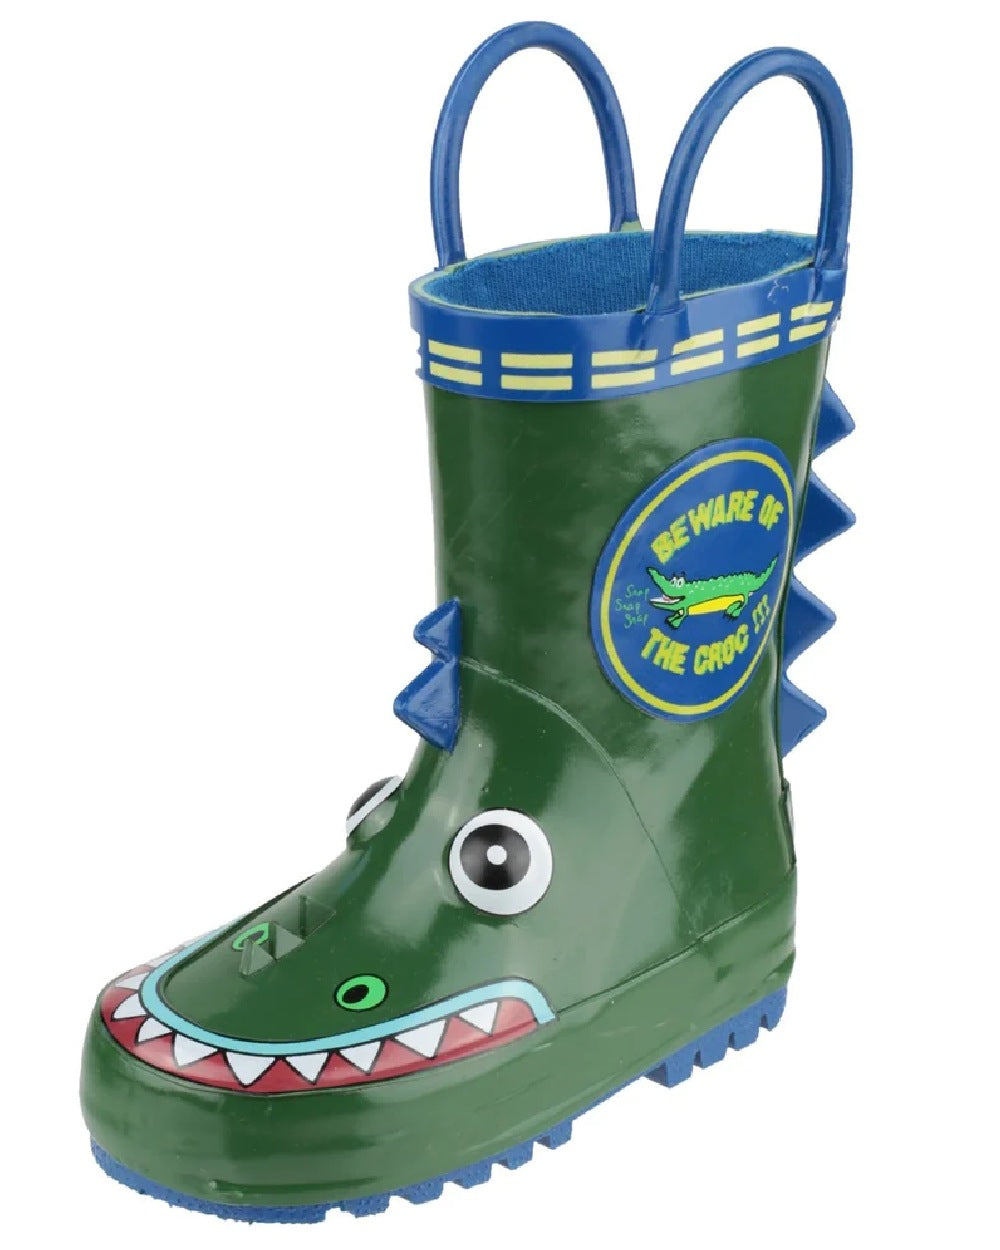 Wotswold Childrens Puddle Waterproof Pull On Boots in Crocodile 